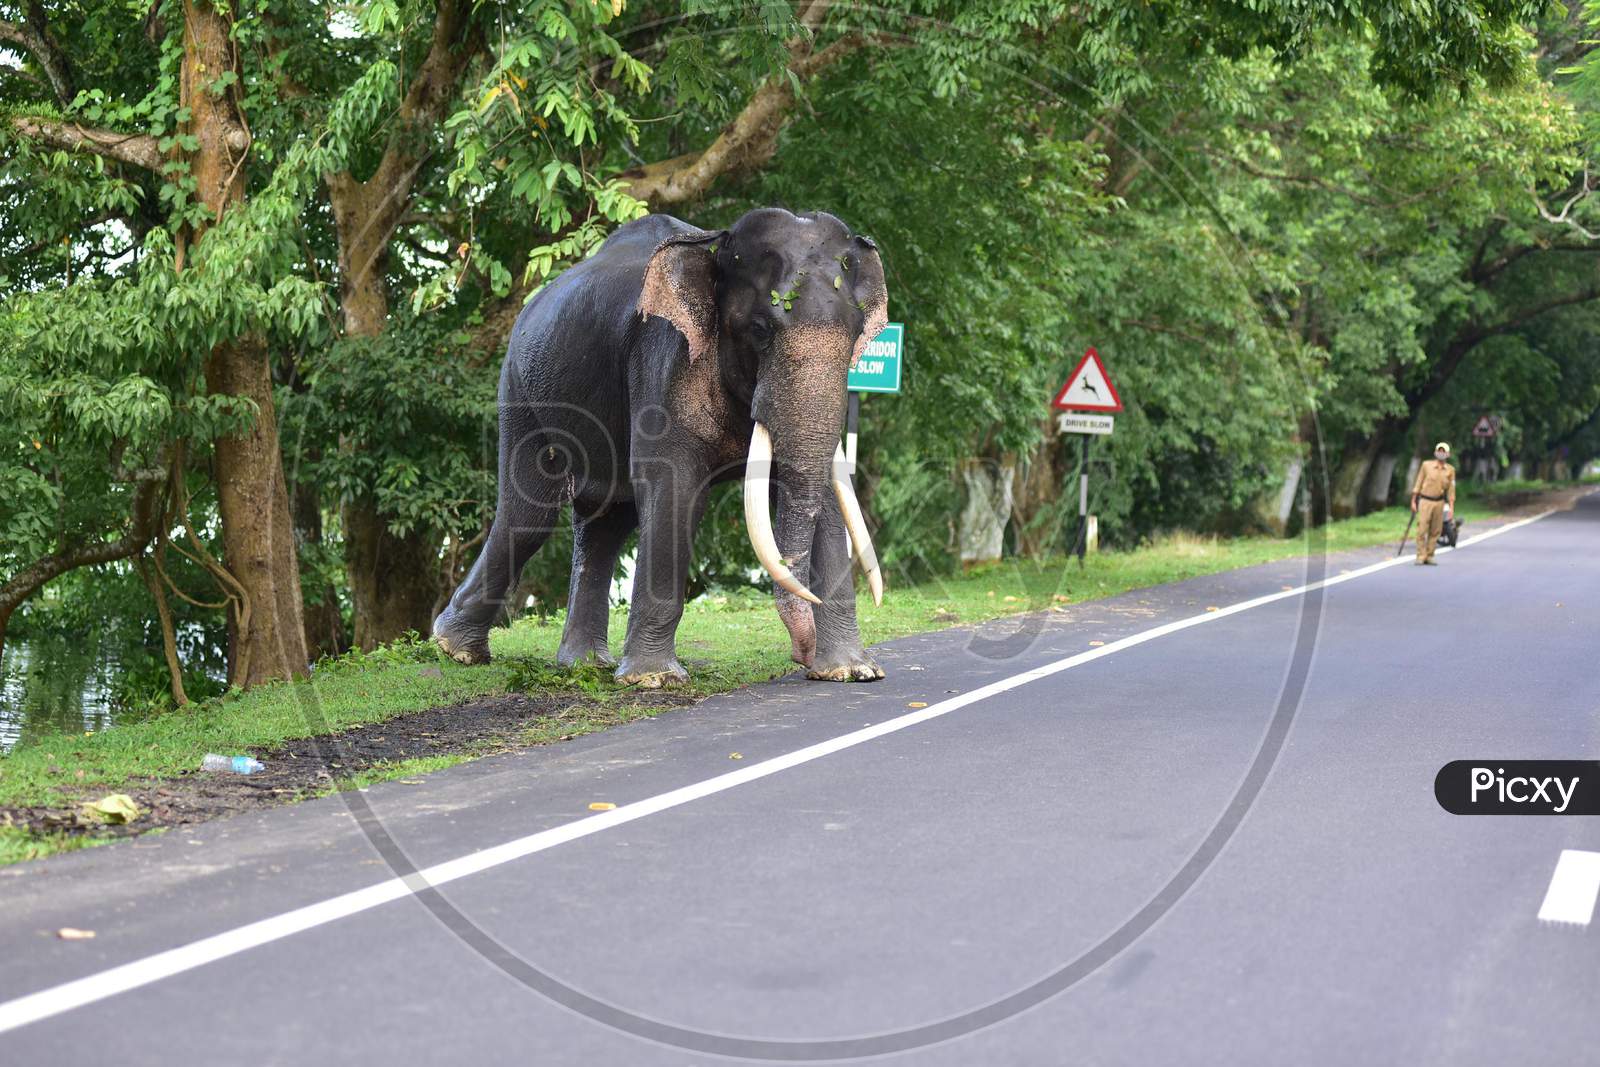 A wild elephant crosses the road to escape the floods in Kaziranga National Park in Nagaon, Assam on July 13, 2020